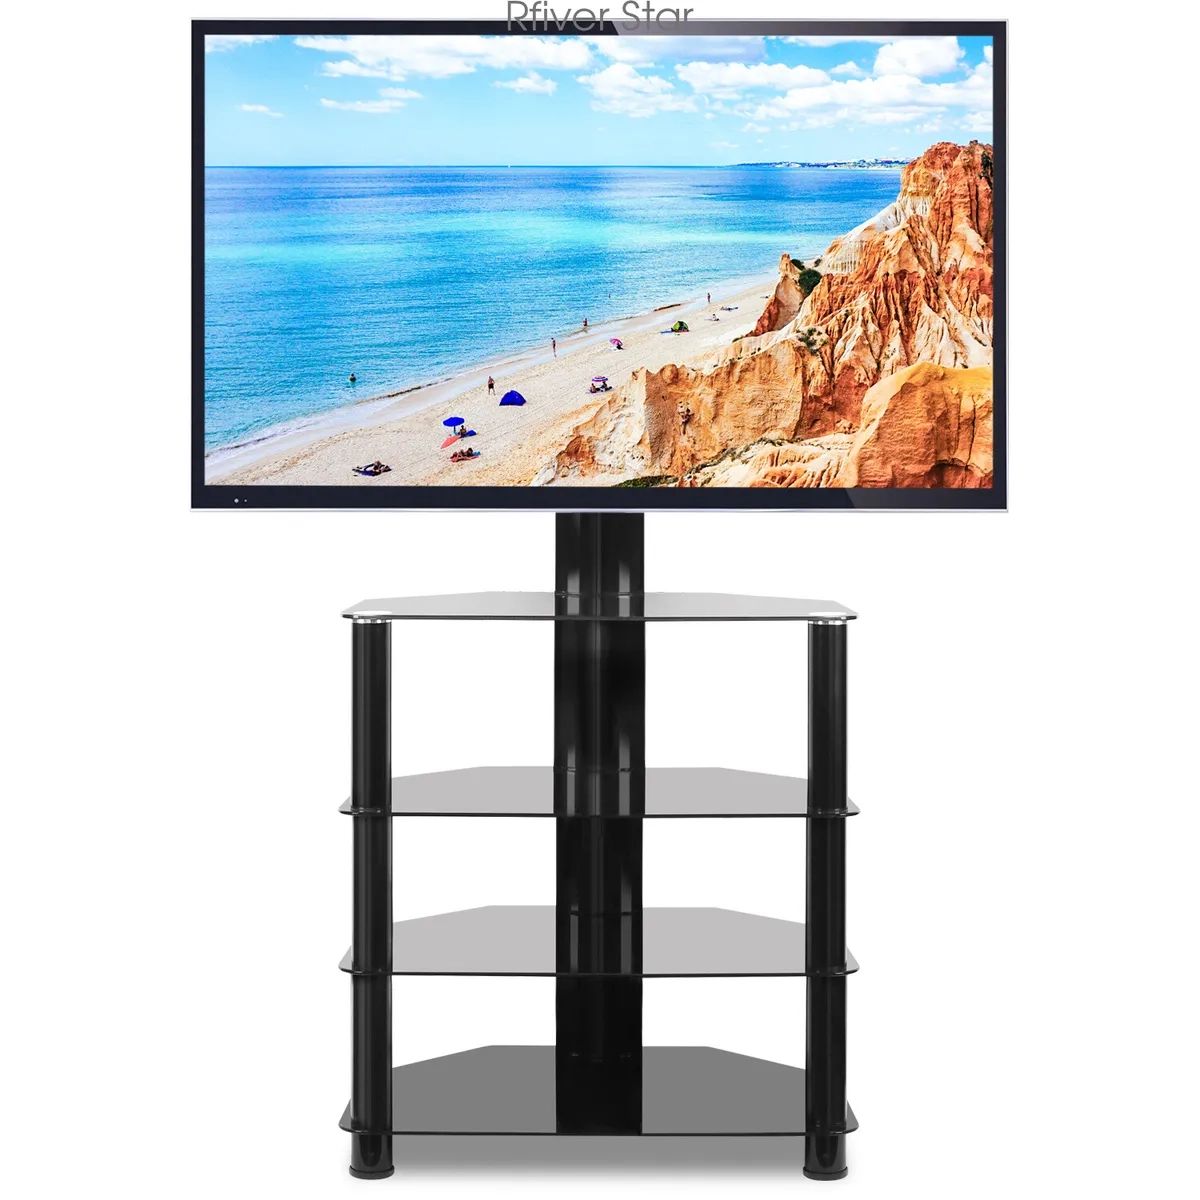 Universal Floor Tv Stand With Swivel Mount And 4 Shelves For 32" 55" Tvs |  Ebay Throughout Universal Floor Tv Stands (View 2 of 15)